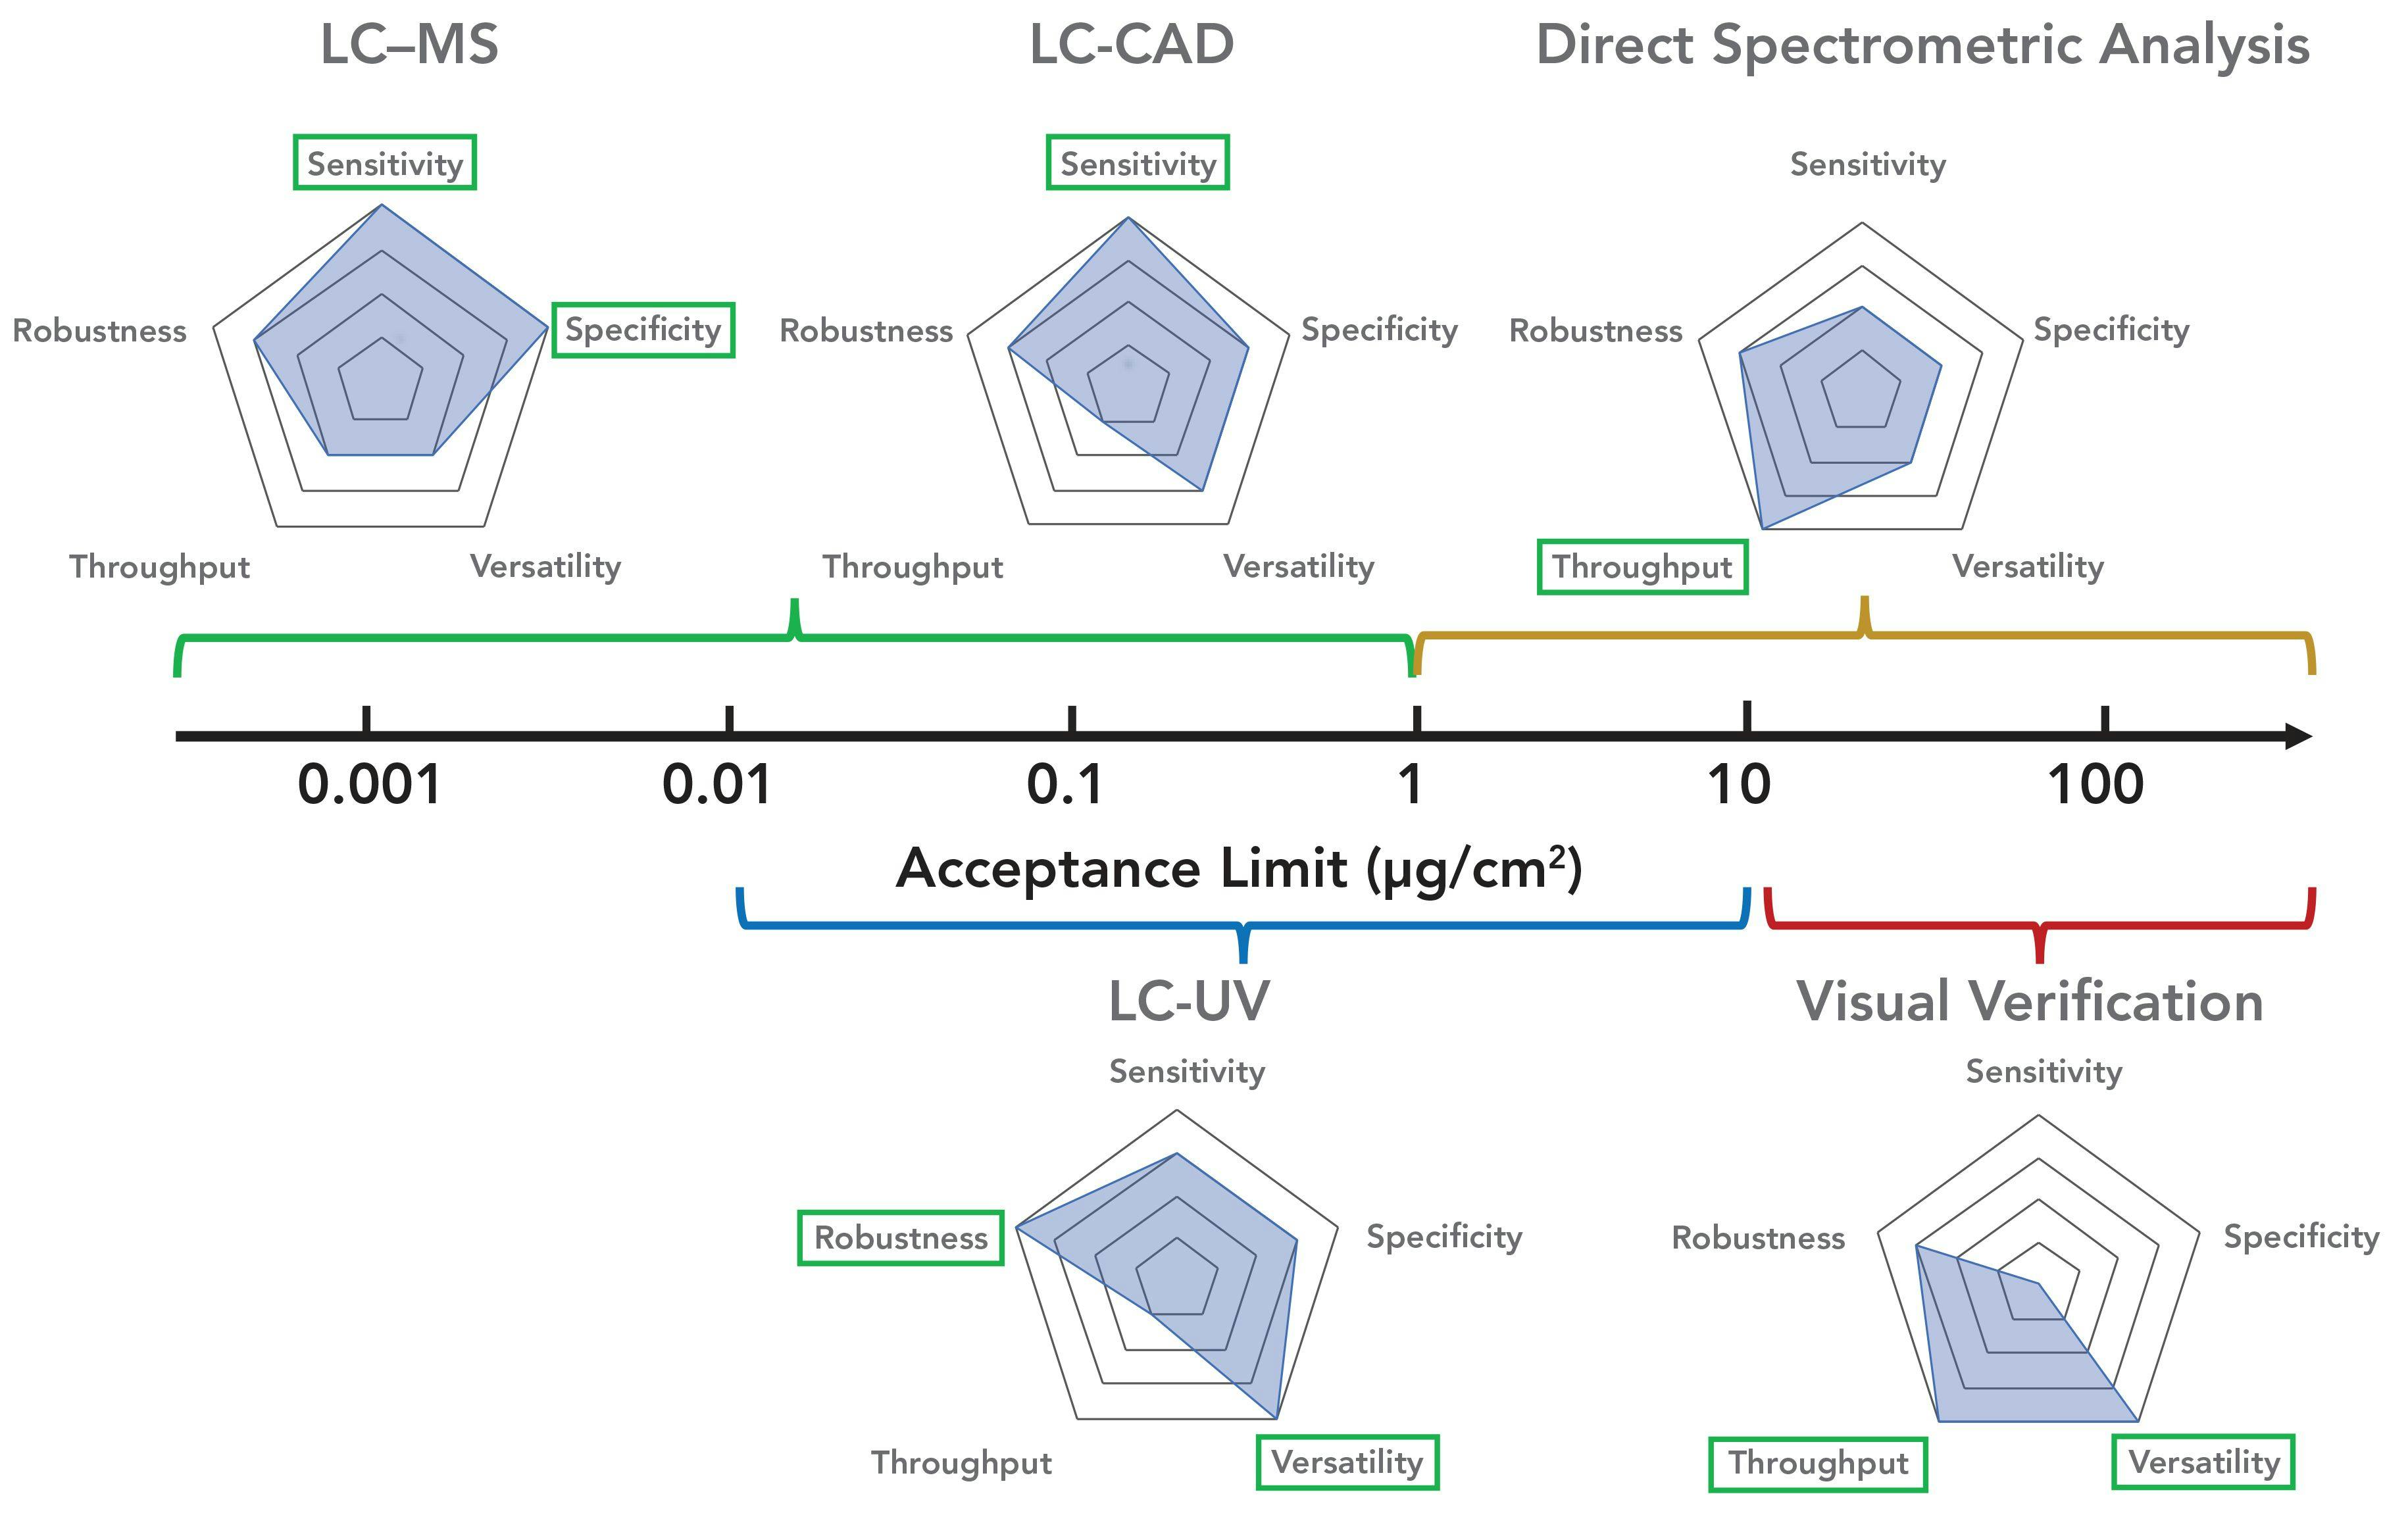 FIGURE 1: Comparison of five CV methods using radar plots. Each CV method was assessed on a 1–5 scale (from center to most outer layer of the pentagon) in the categories of method sensitivity, specificity, robustness, versatility, and throughput. The highest scores of each method are highlighted in green boxes. The application range for each method are also shown based on the different levels of acceptance limit for CV samples.